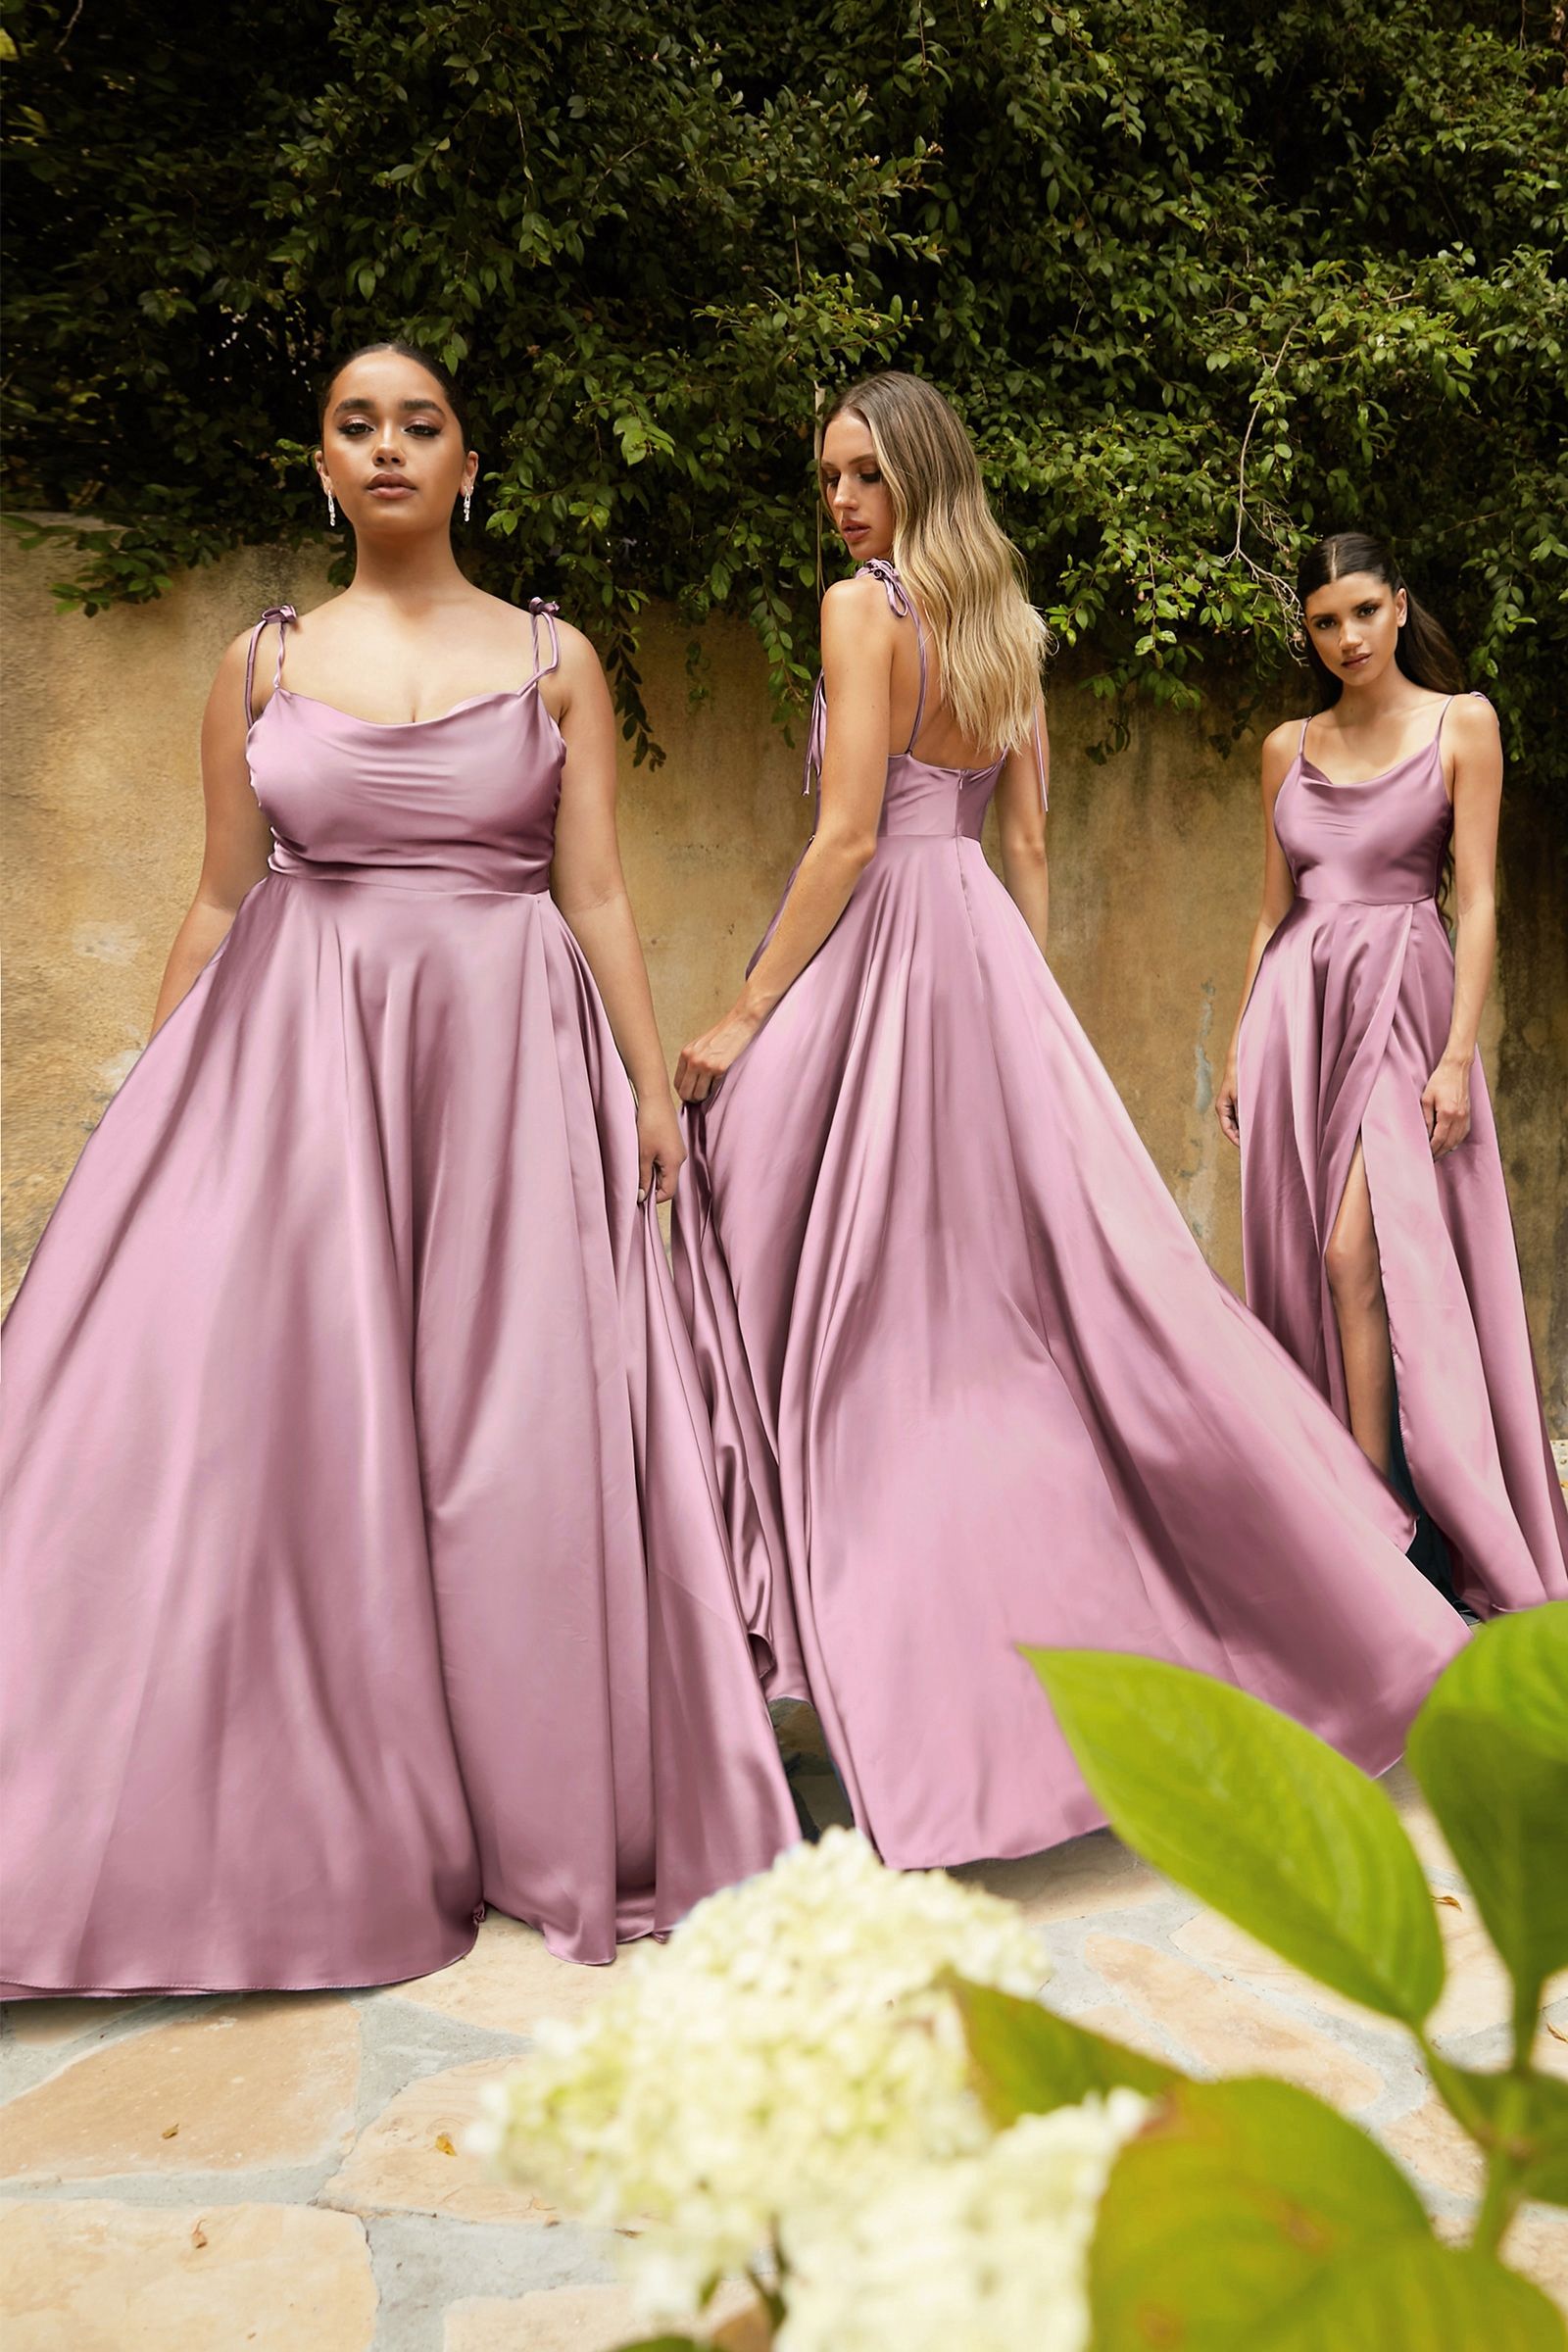 Ladivine BD104 Bridesmaid dress satin A line scoop necklineThe Ladivine BD104 Bridesmaid Dress offers a timeless look with its classic A-line silhouette and scoop neckline. Made from luxurious satin, the dress features a chic slit detail that allows you to create the perfect evening look. Perfect for any special occasion, this dress is sure to make an impression.